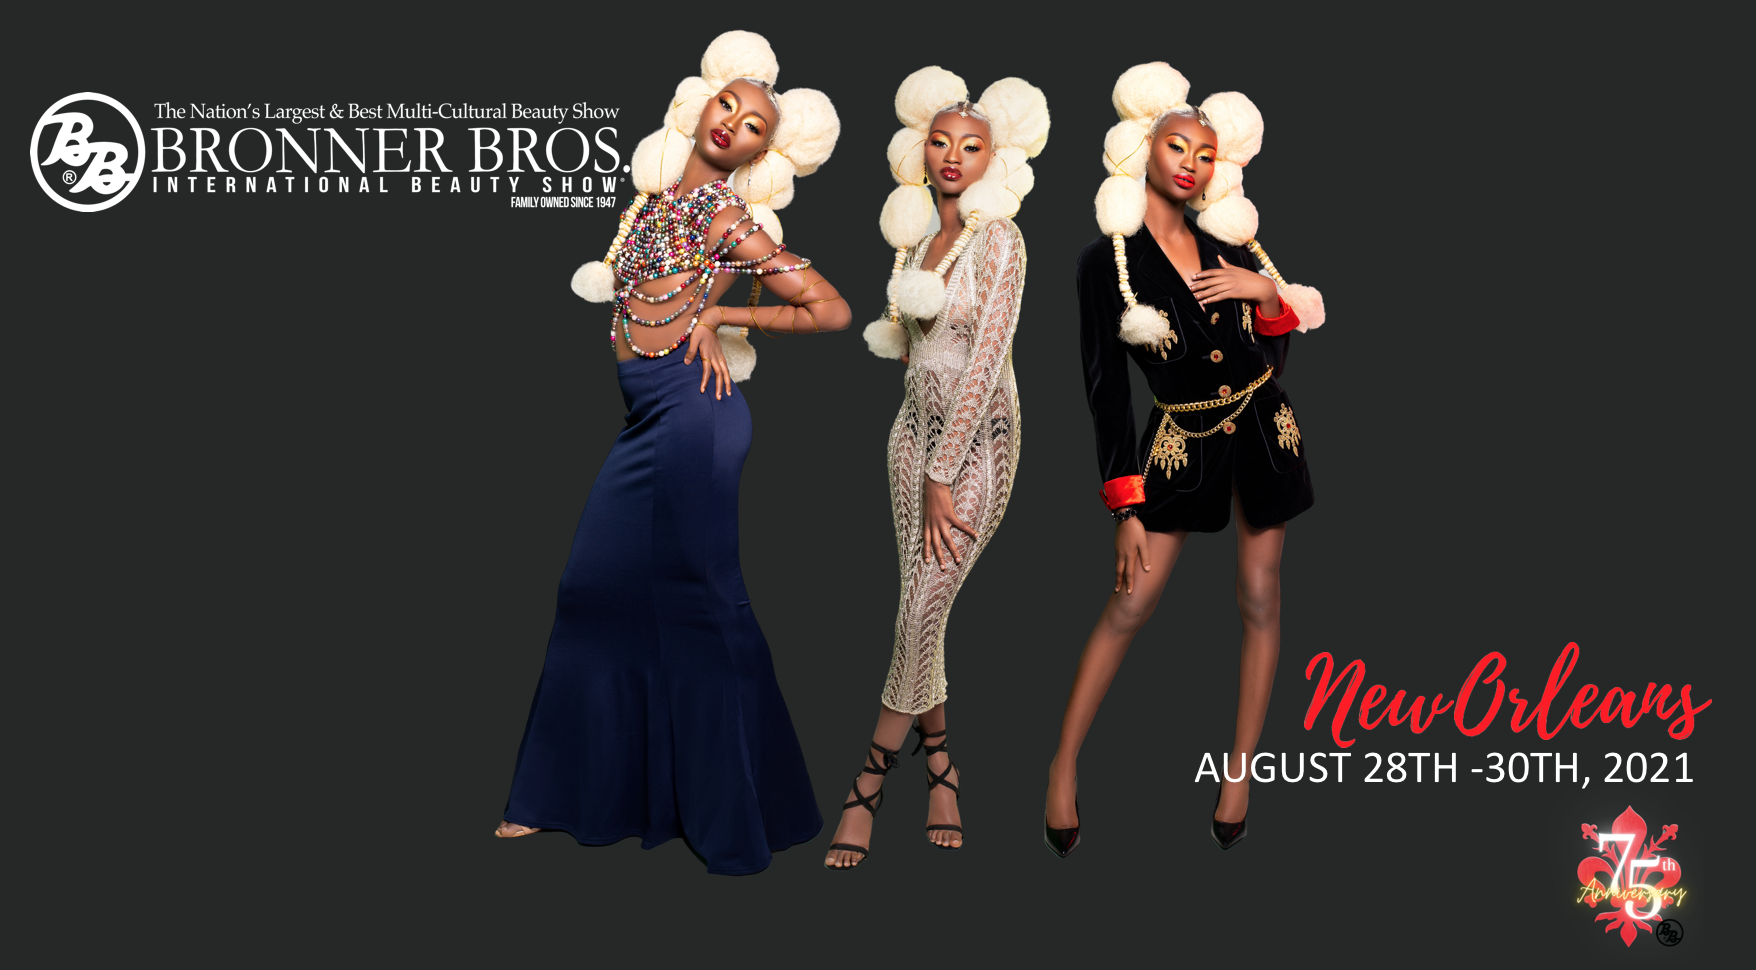 Legendary Bronner Bros. Beauty Show Returns to New Orleans To Celebrate